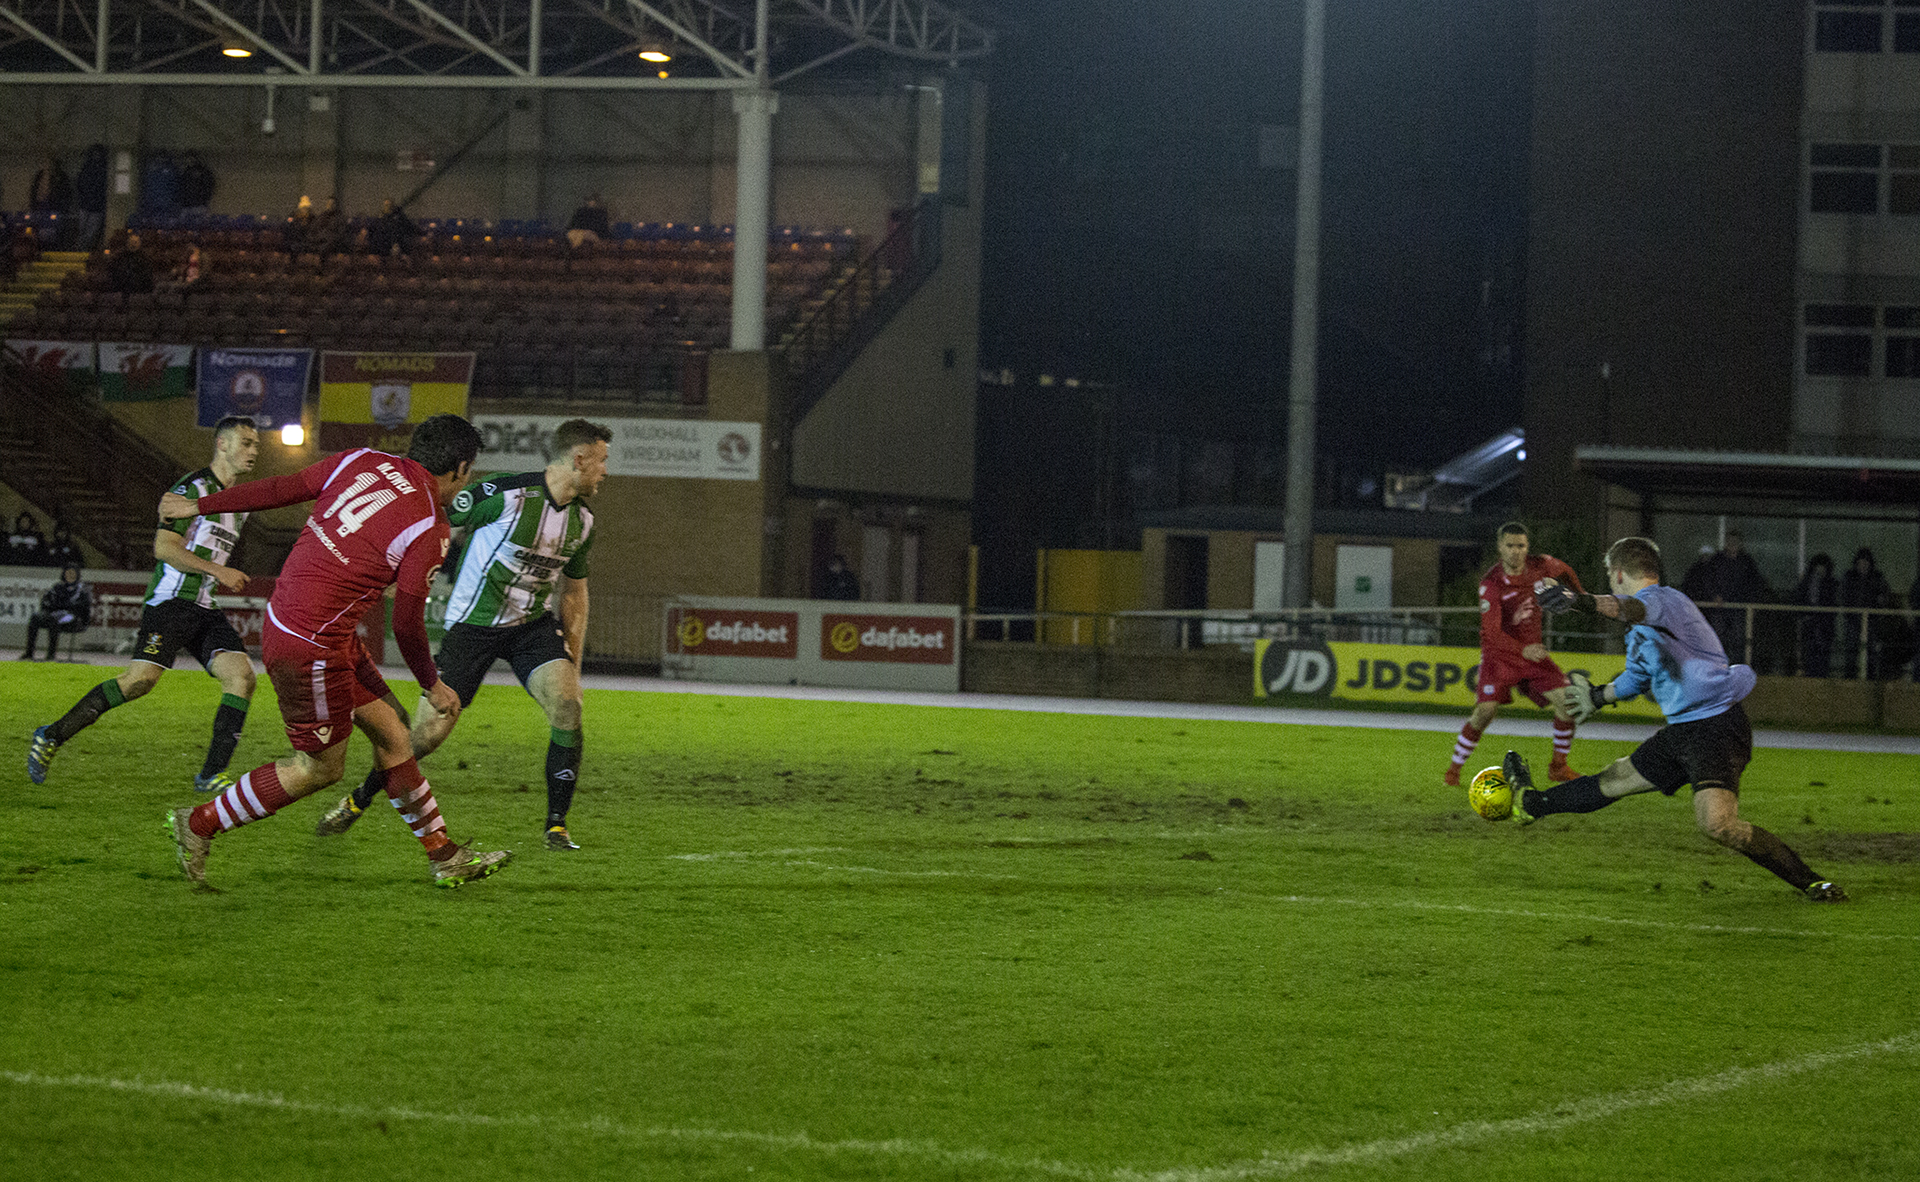 Matty Owen squares a pass to Kai Edwards before he taps in The Nomads' fourth goal of the night - © NCM Media